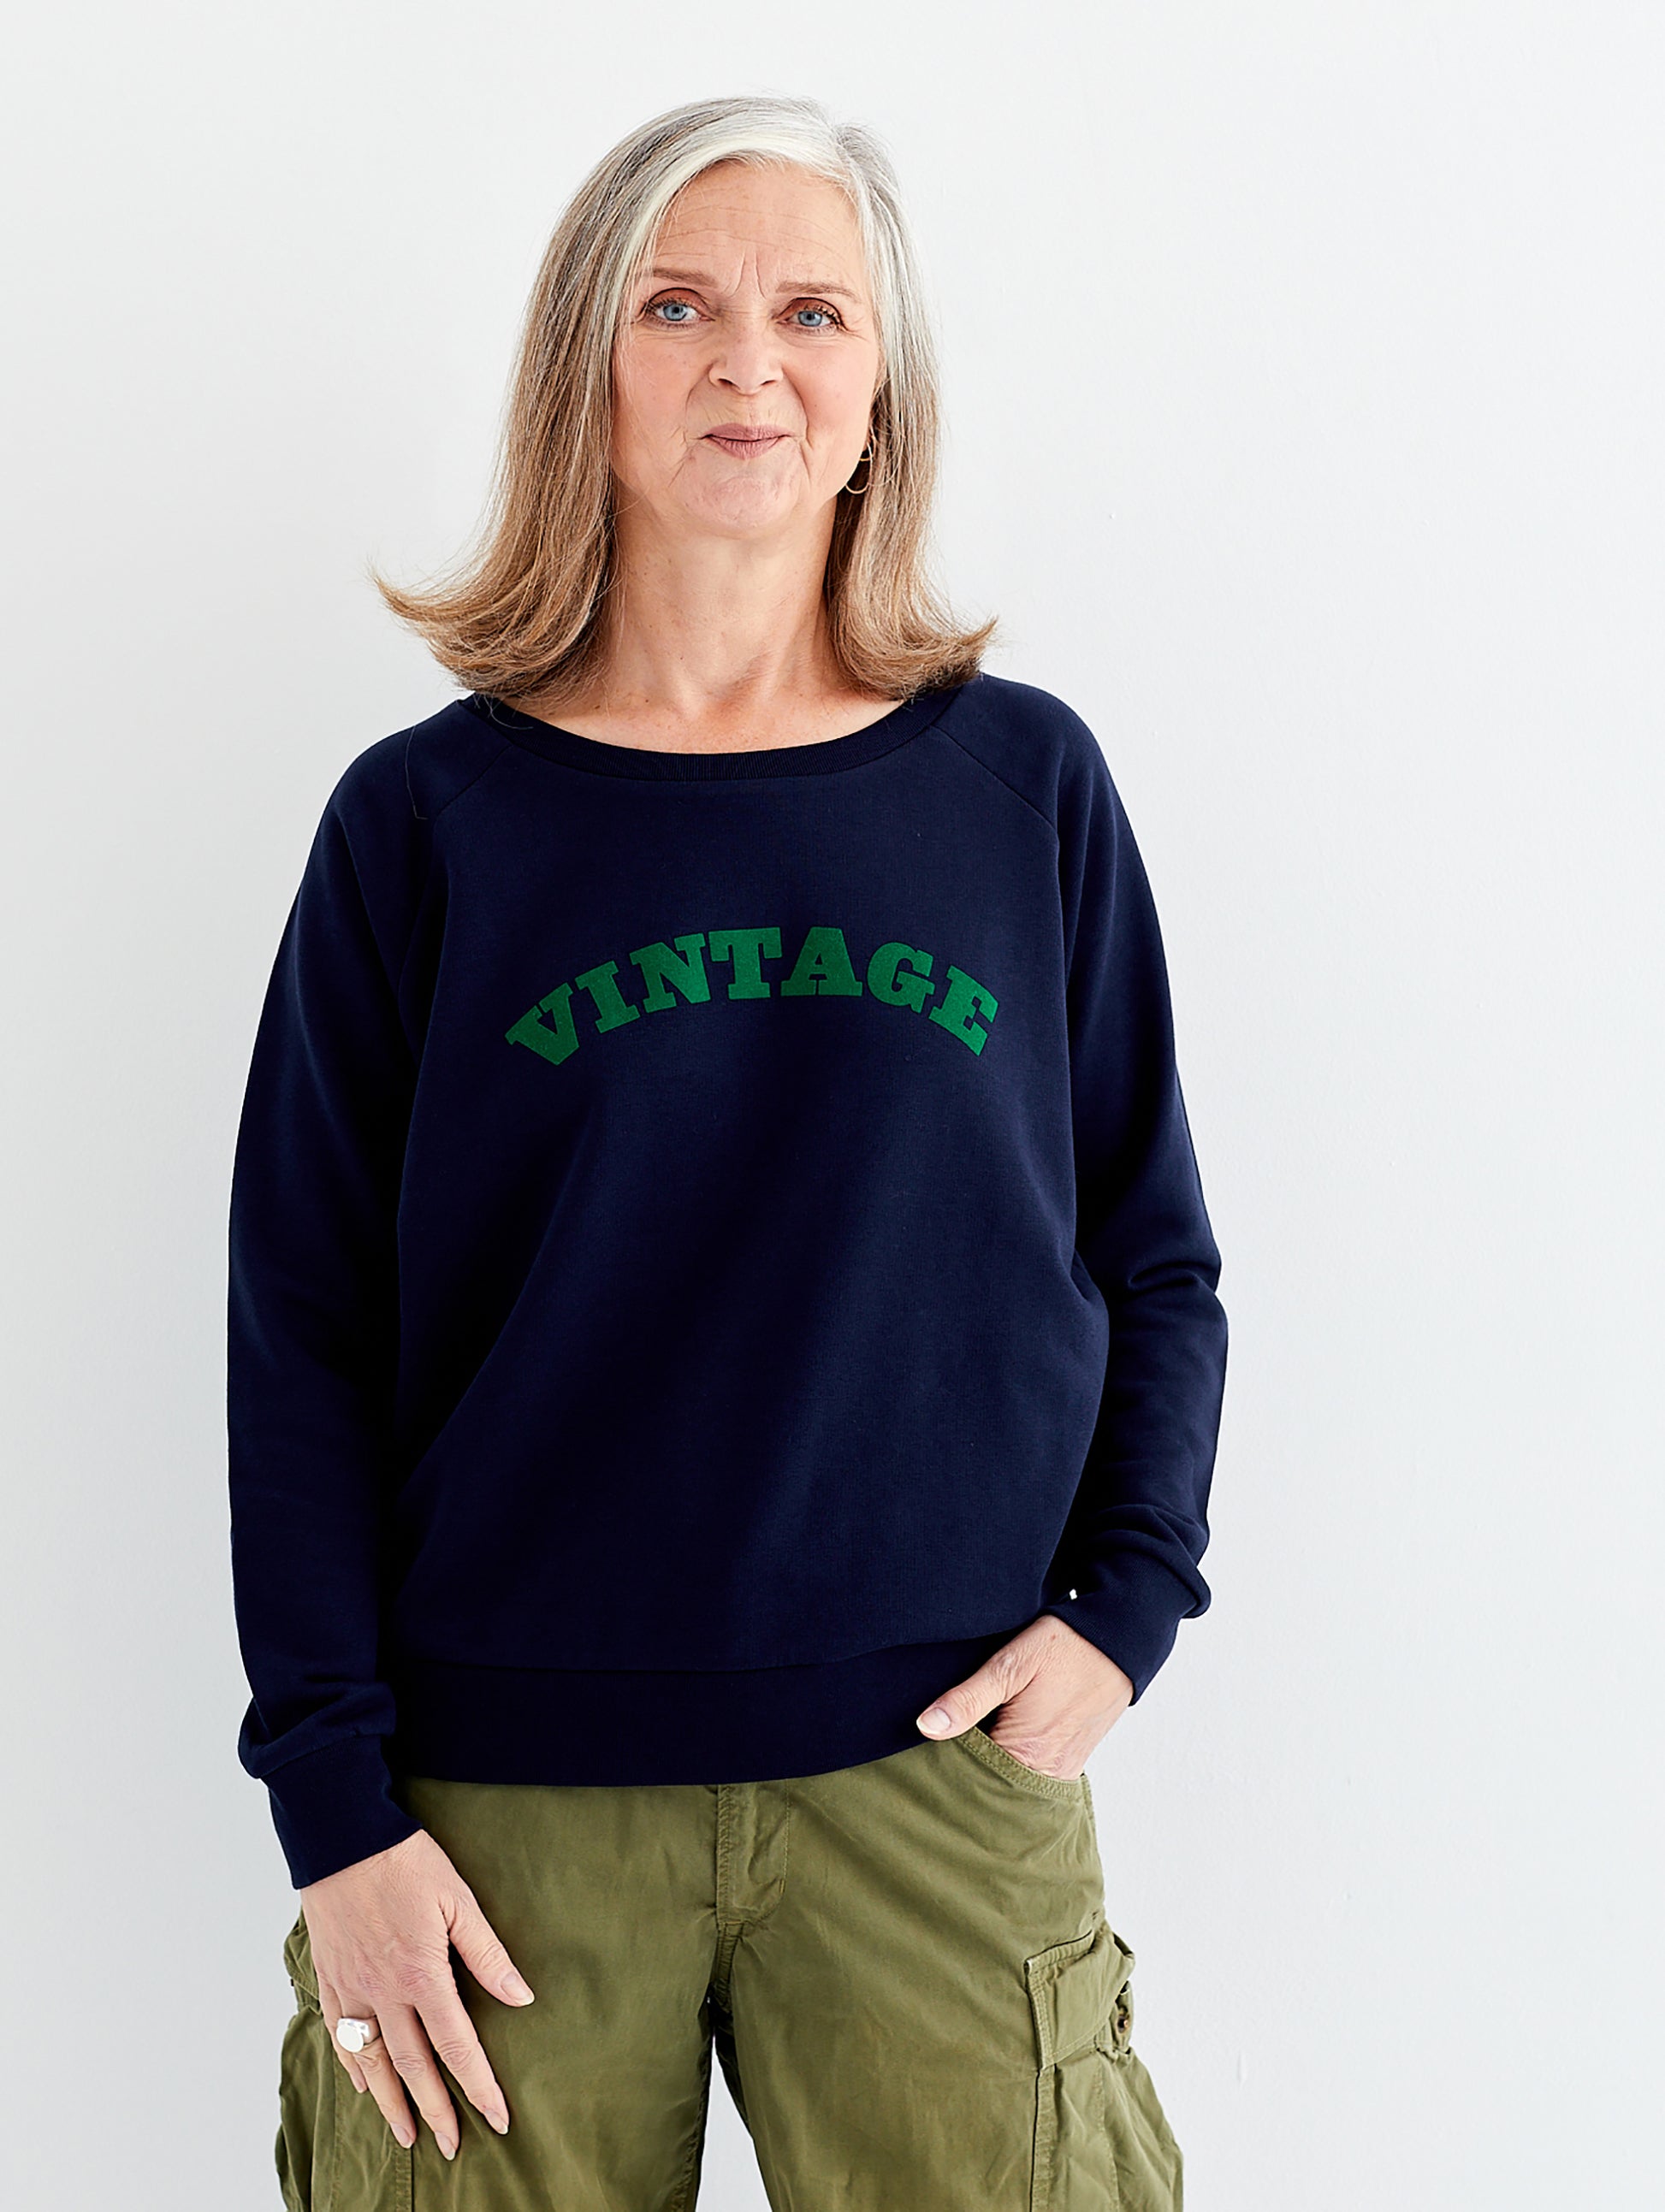 Thats not my Age Alyson Walsh wearing our collaboration Vintage navy sweatshirt